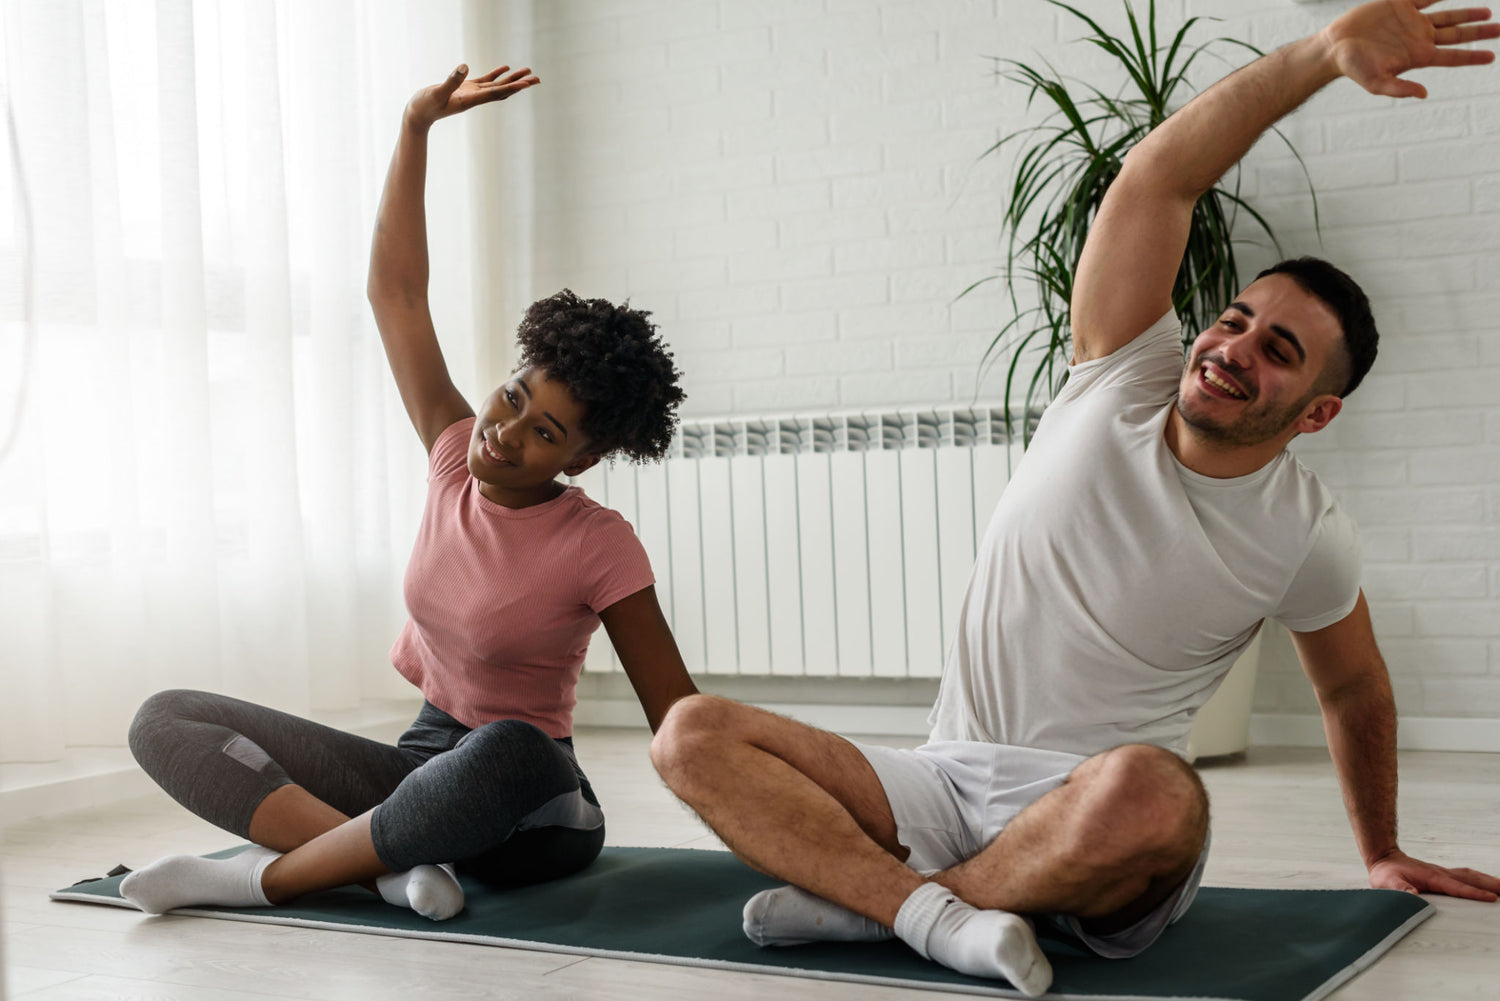 A man and a woman sitting on yoga mats, smiling and doing side stretch exercises in a bright room.